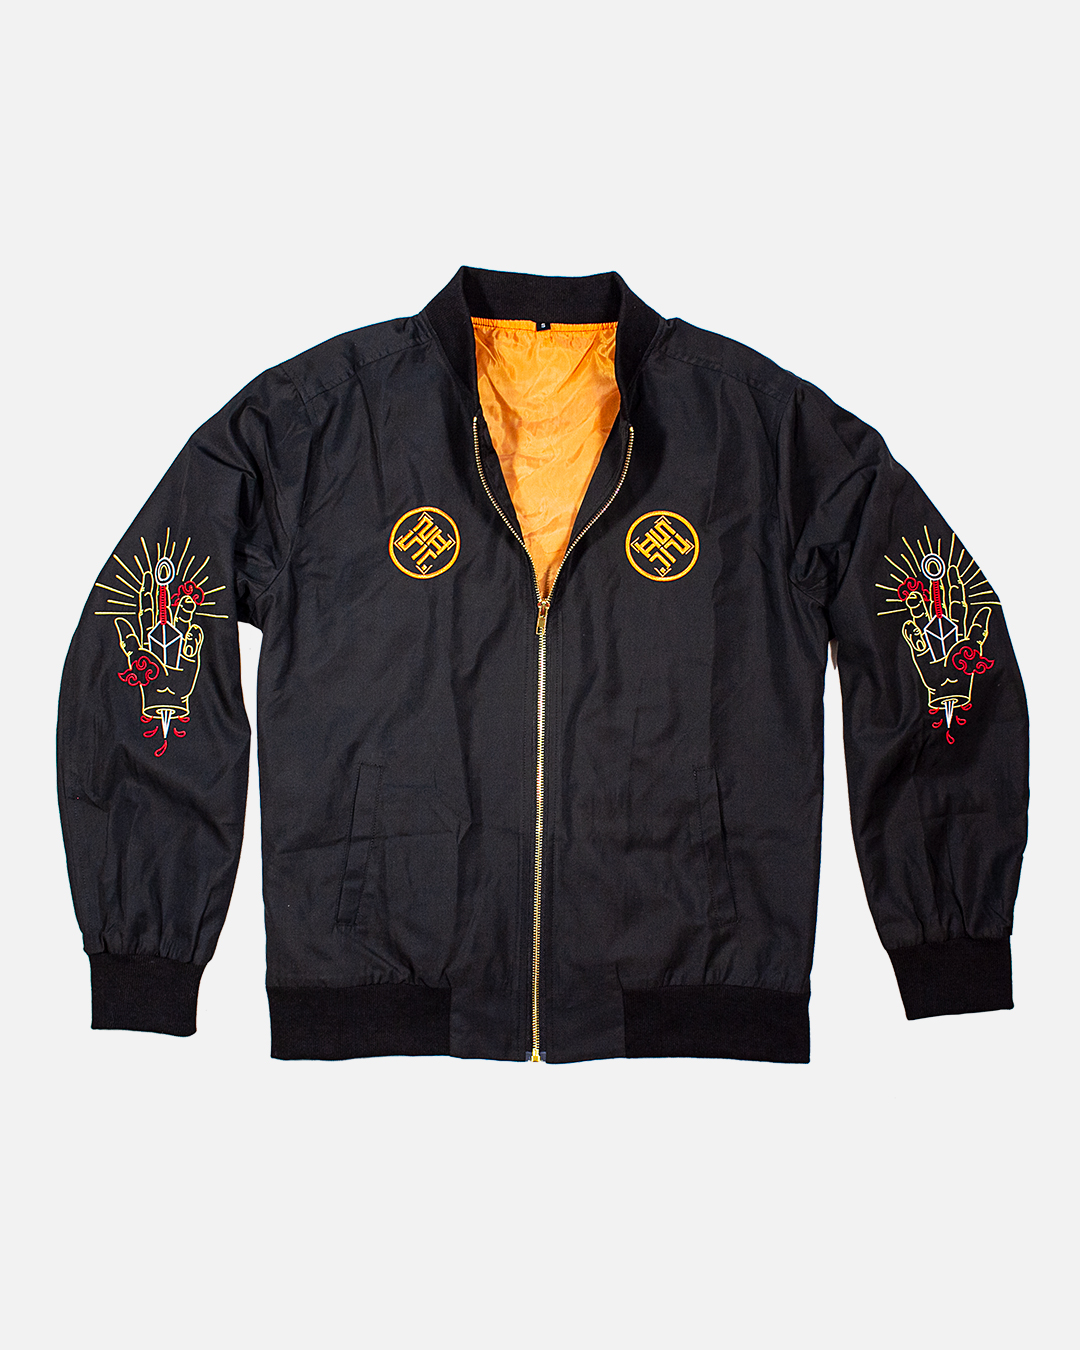 DEATH BEFORE DISHONOR SPRING JACKET